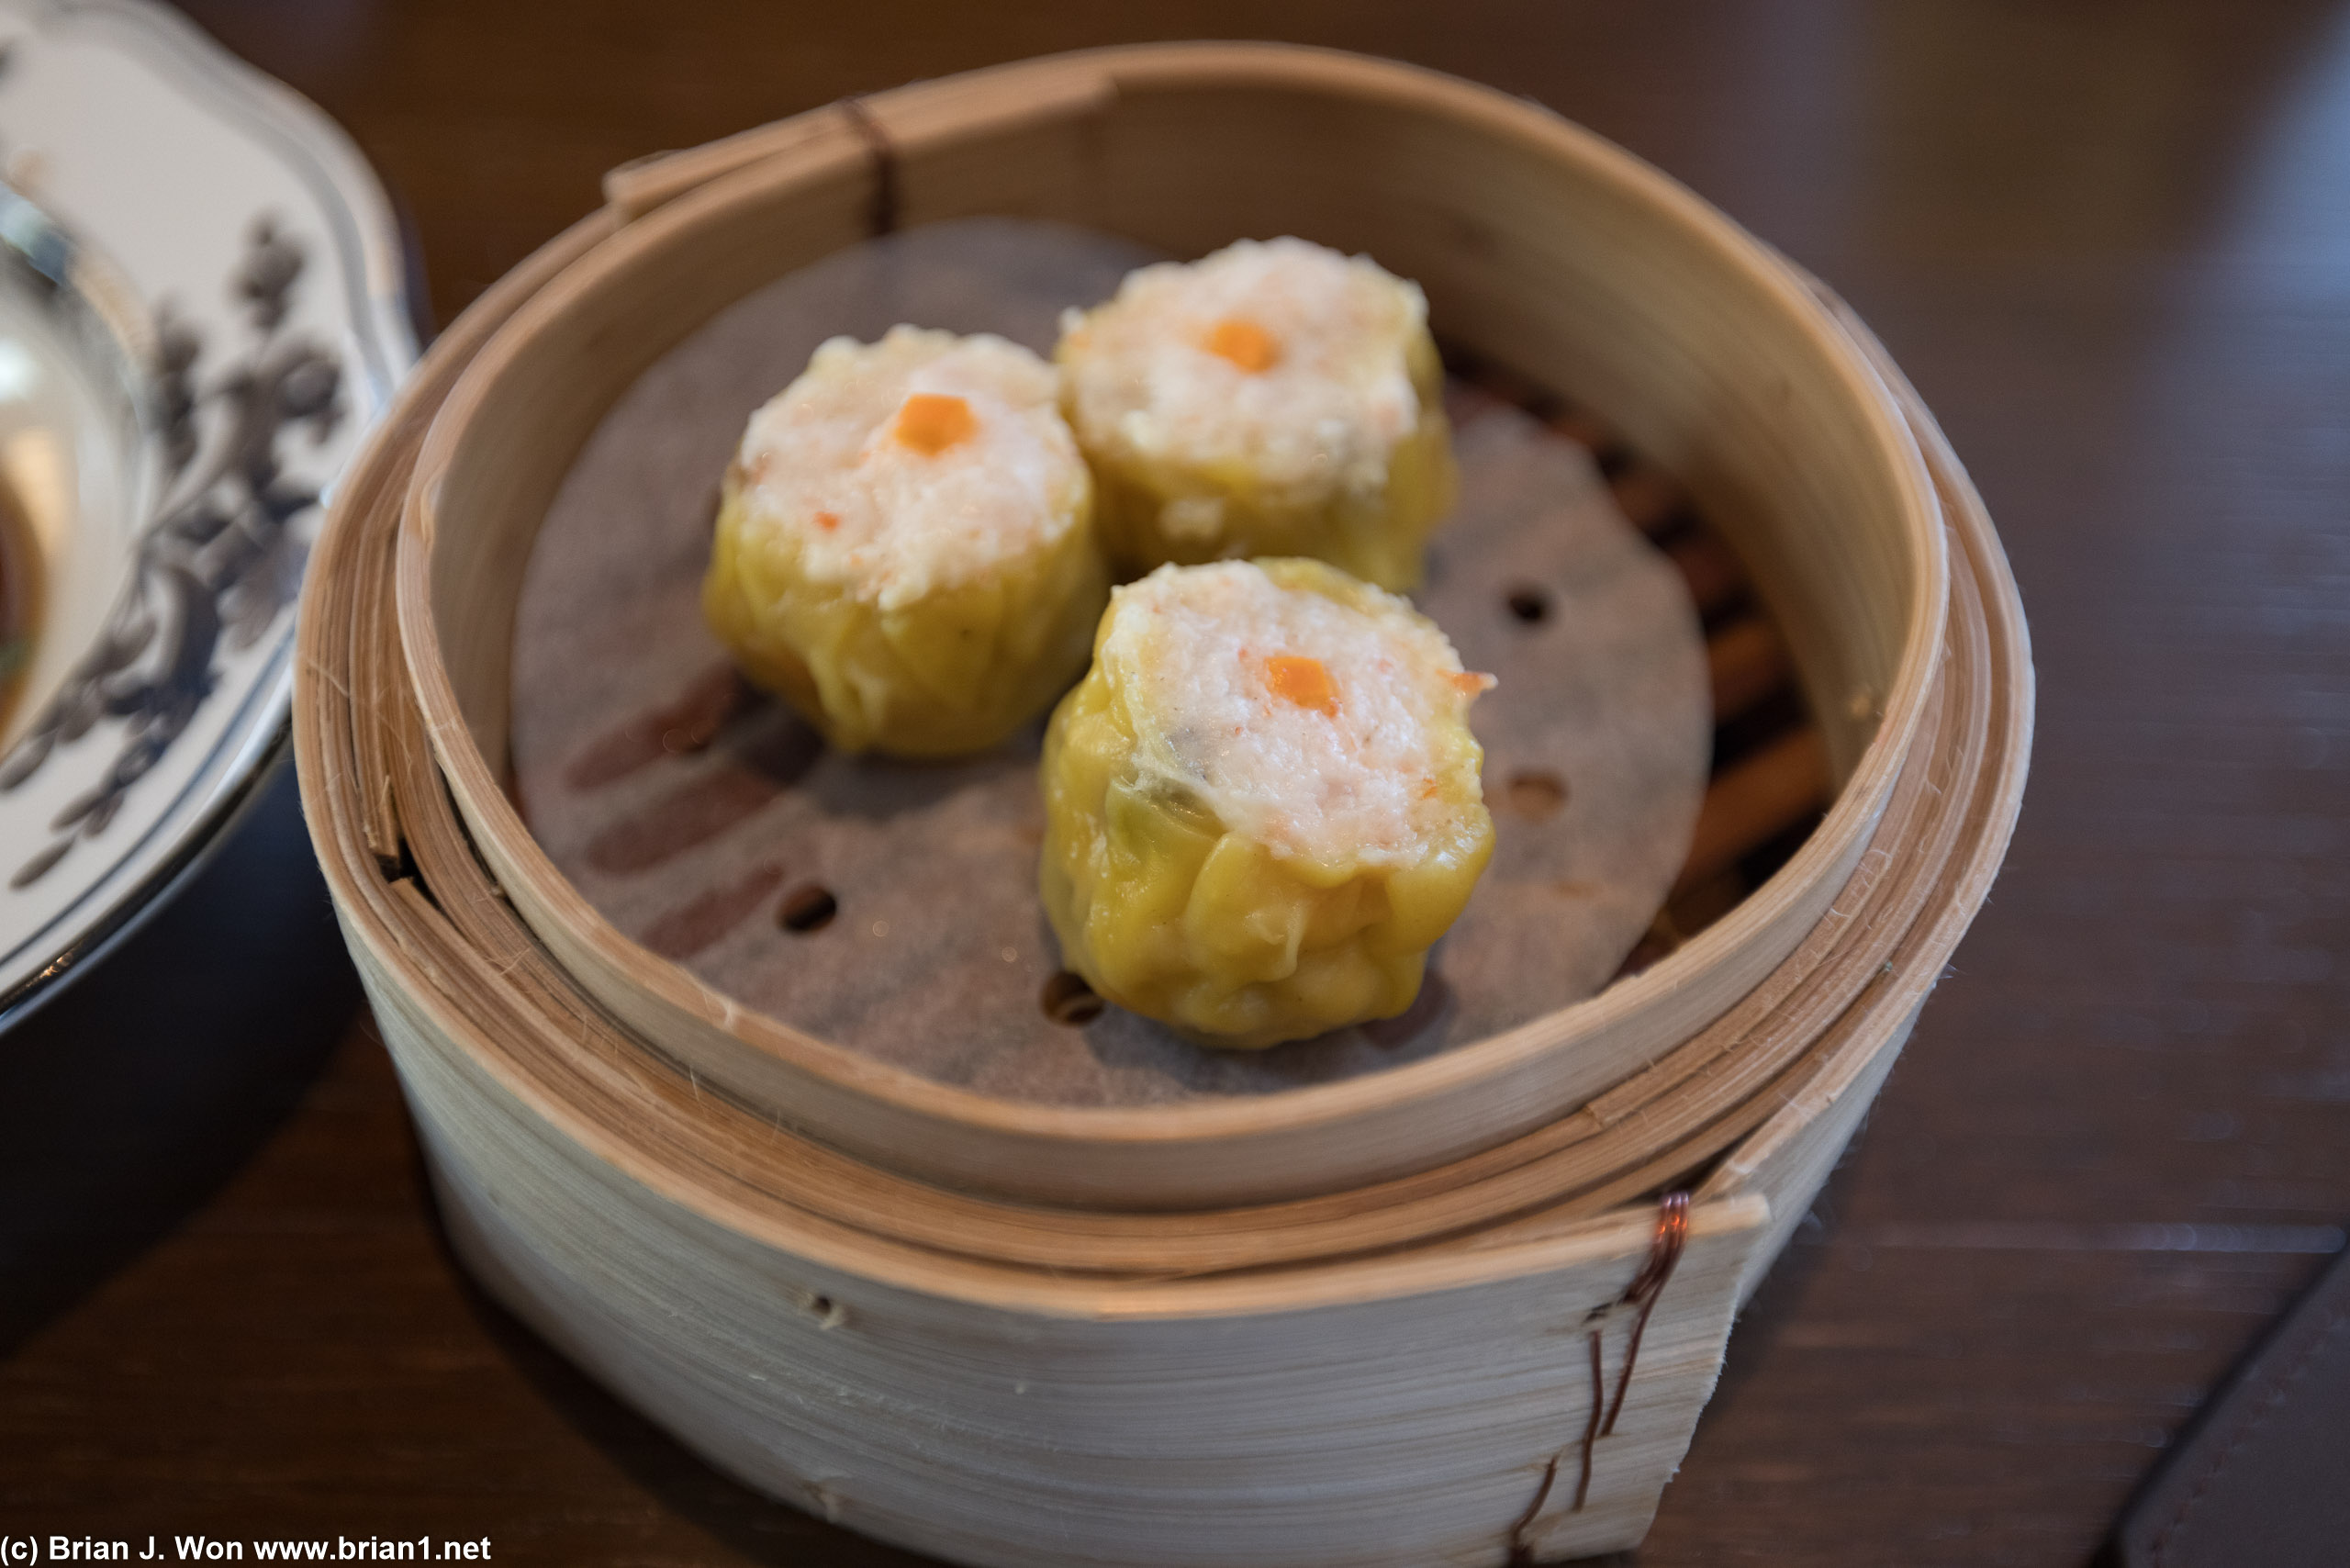 Shrimp and pork siu mai, in the Singaporean style (as opposed to the fat American style).